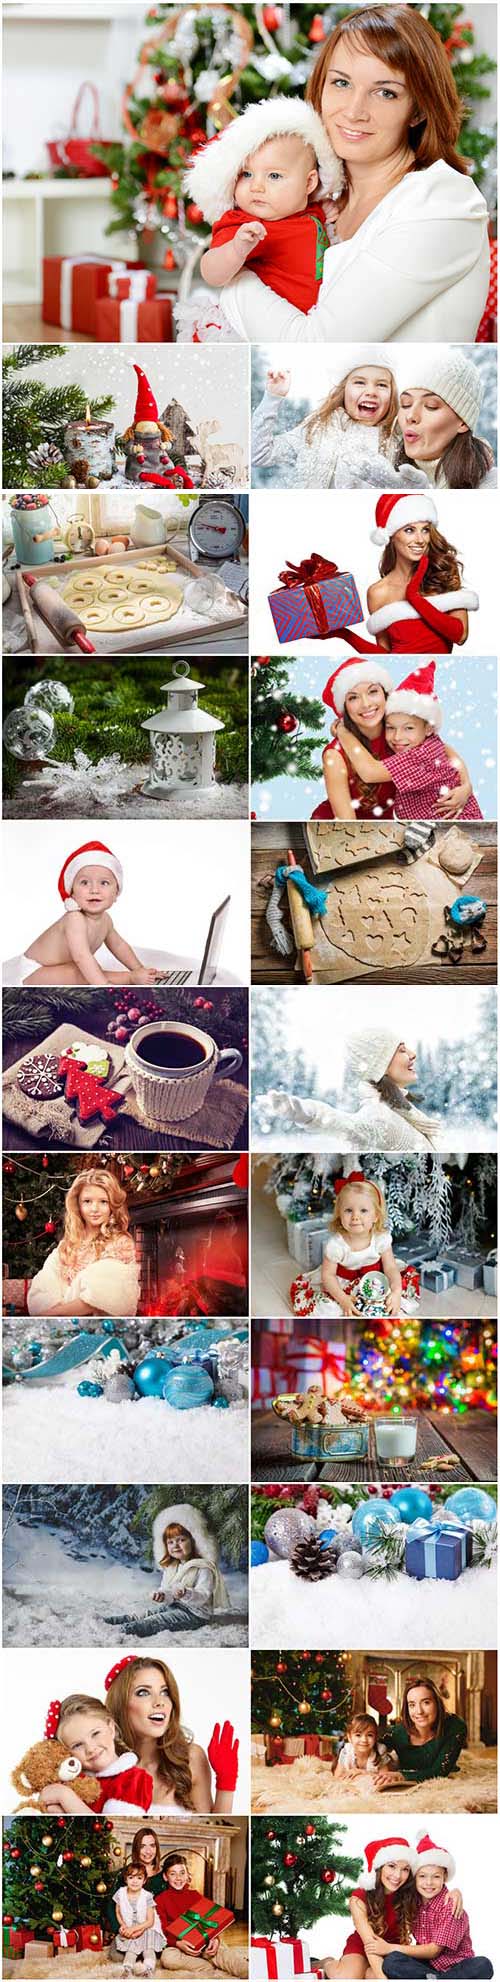 New Year and Christmas stock photos 89